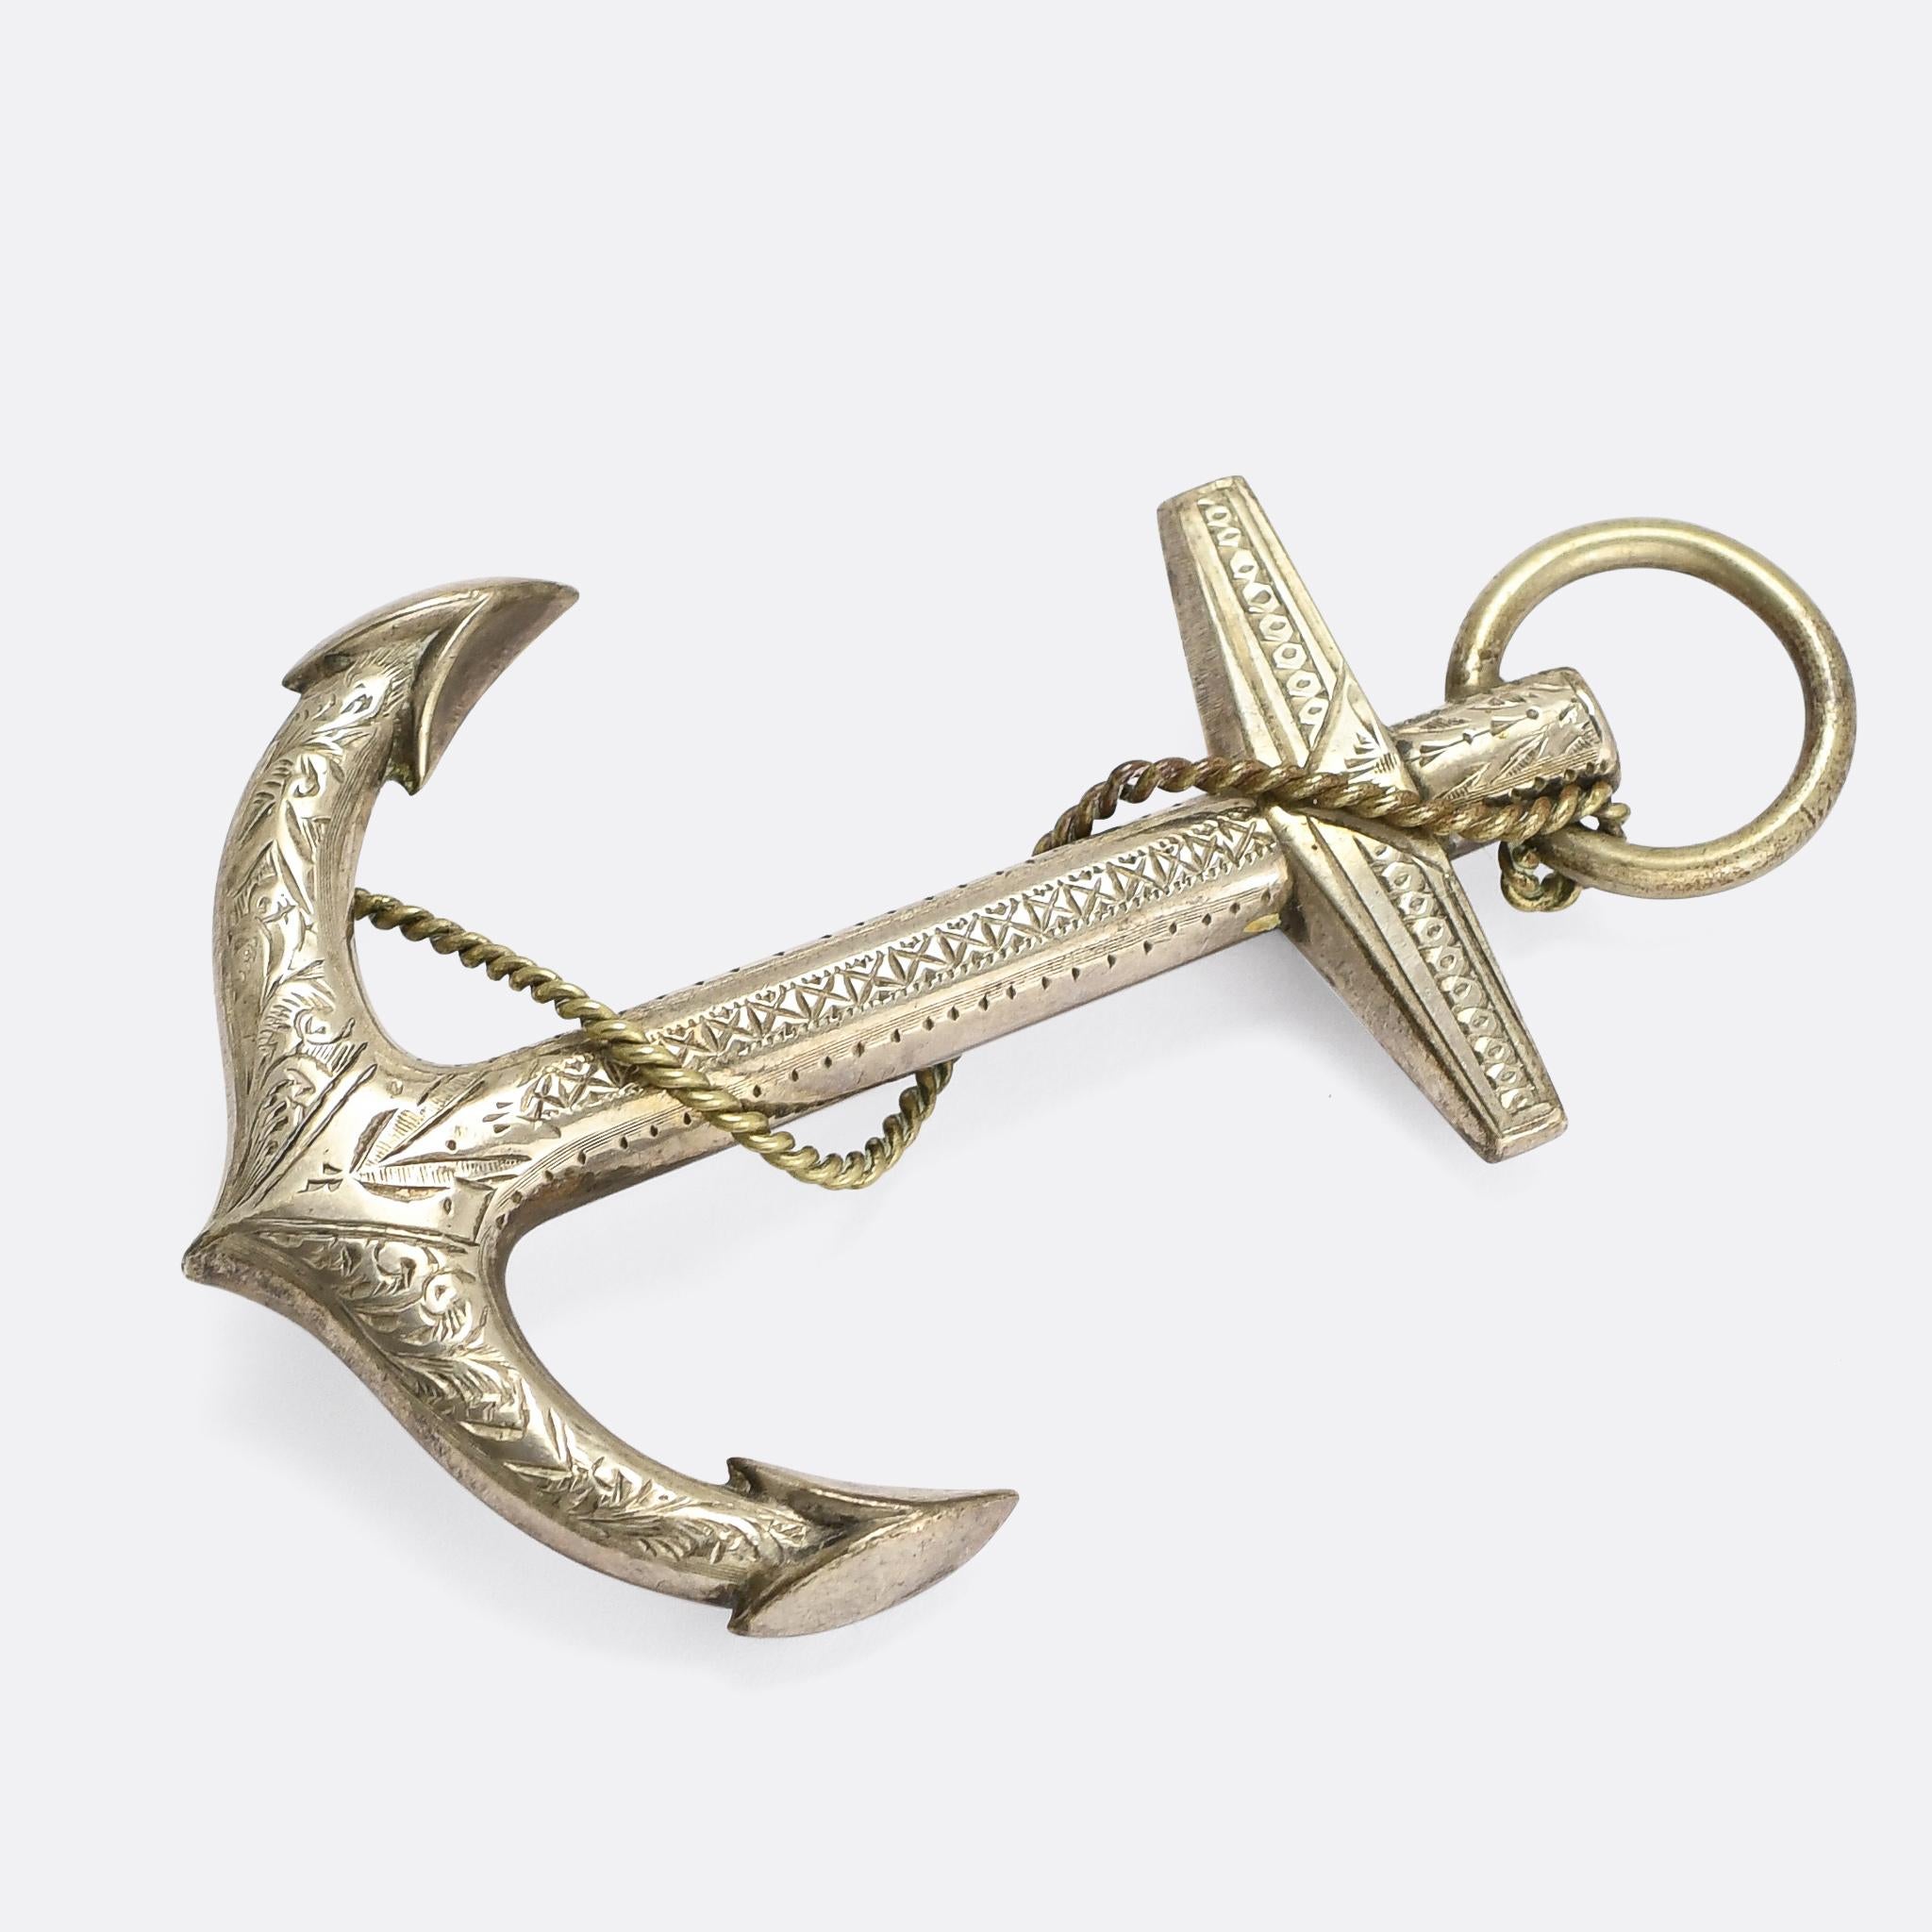 A fantastic oversized silver anchor brooch dating from the mid Victorian period, circa 1860. It's intricately hand-chased with geometric, foliate, and other abstract motifs, and crafted in sterling silver. The rope coiled around it makes it what's